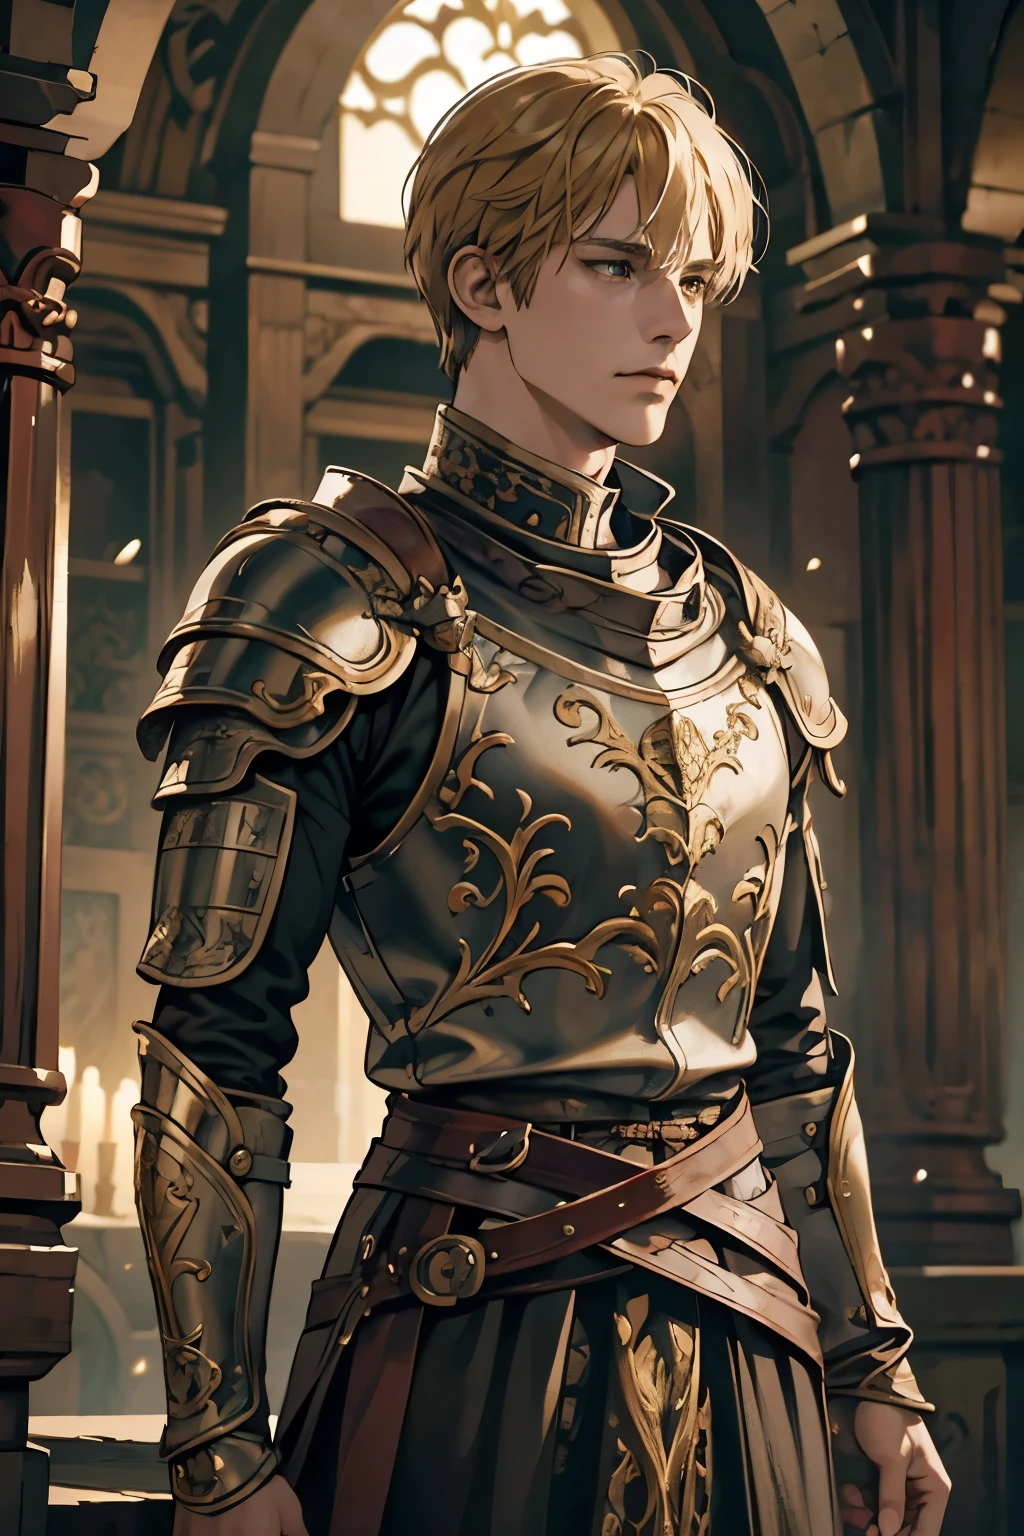 Jamie Lannister, portrayed as an anime character from the Game of Thrones series, presents a perfect depiction with highly detailed attire and accessories. His intricately designed armor, gleaming gold accents, and meticulously crafted sword add to his regal elegance. Anime Jamie's anatomy is highly accurate, capturing every muscle tone and contour of the original character.

The cinematic colour grading used in this illustration brings the scene to life. The shallow depth of field focuses the viewer's attention on Jamie, with the background gently blurred, creating a sense of depth and realism. The intricate details of his armor and the subtle textures of